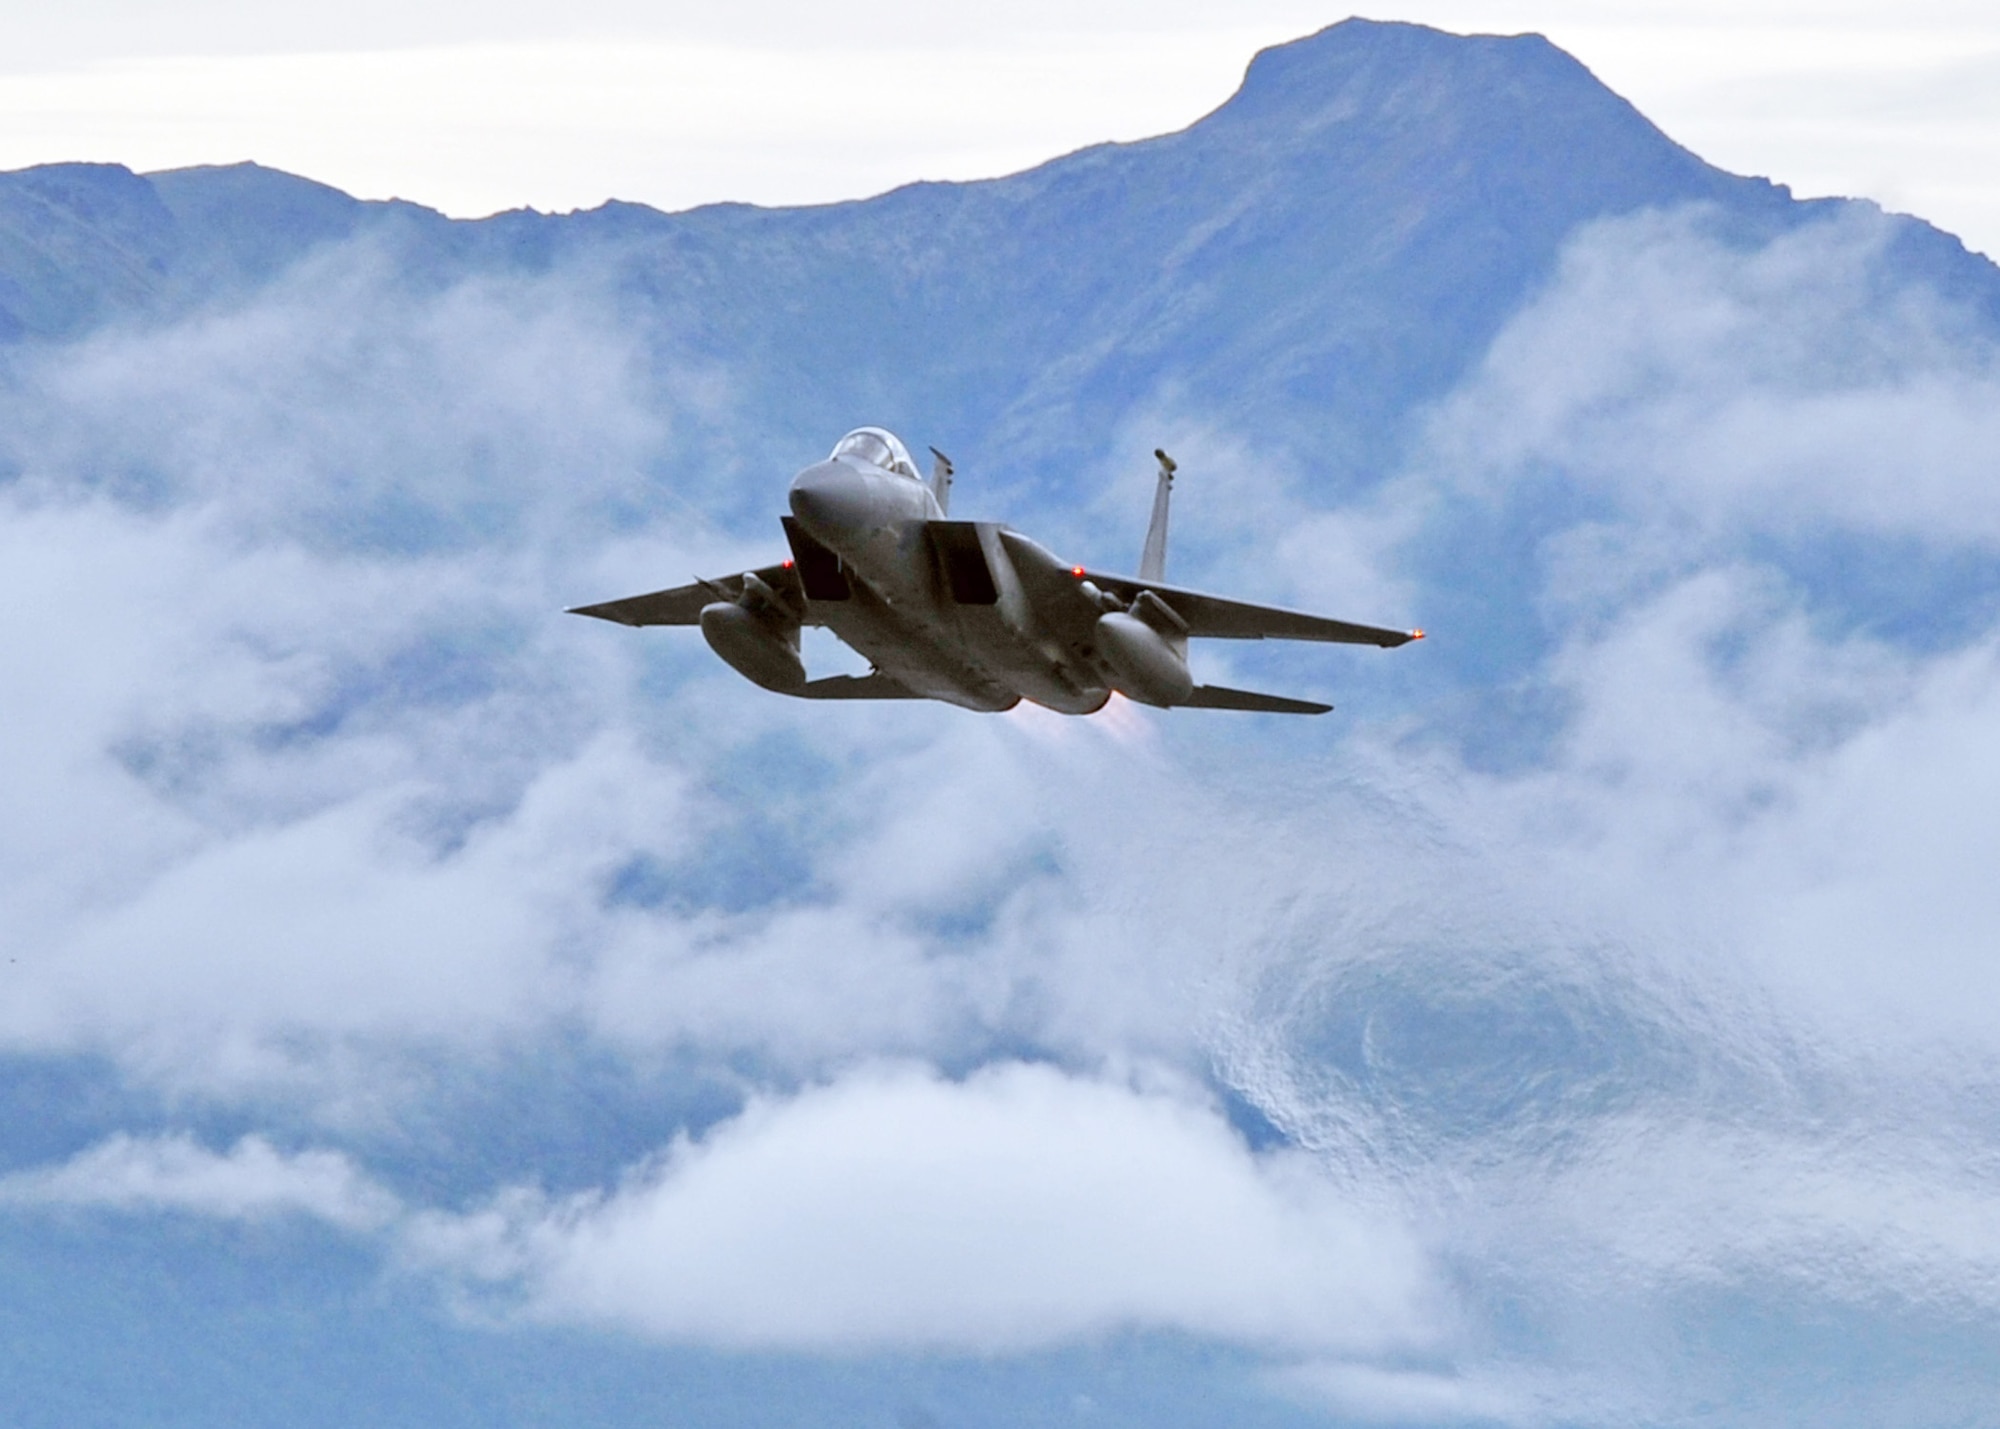 An F-15 Eagle takes off from Elmendorf Air Force Base, Alaska, July 28. The F-15 is assigned to the 19th Fighter Squadron. The unit is a part of the 3rd Wing at Elmendorf AFB and is one of three fighter squadrons there. (U.S. Air Force photo/Senior Airman Laura Turner)